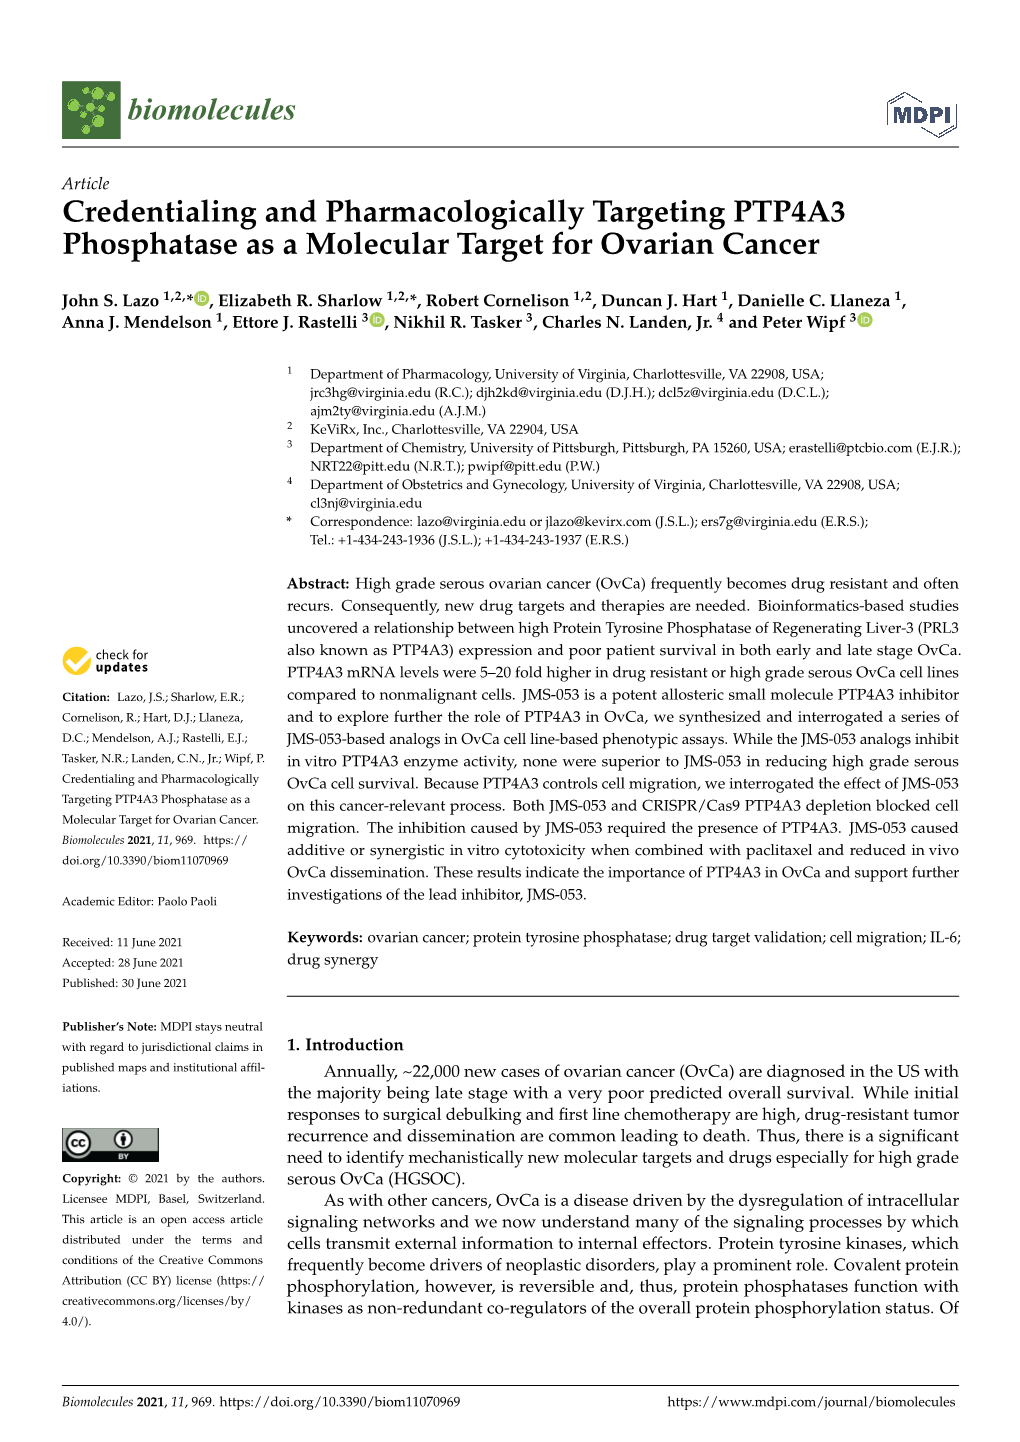 Credentialing and Pharmacologically Targeting PTP4A3 Phosphatase As a Molecular Target for Ovarian Cancer